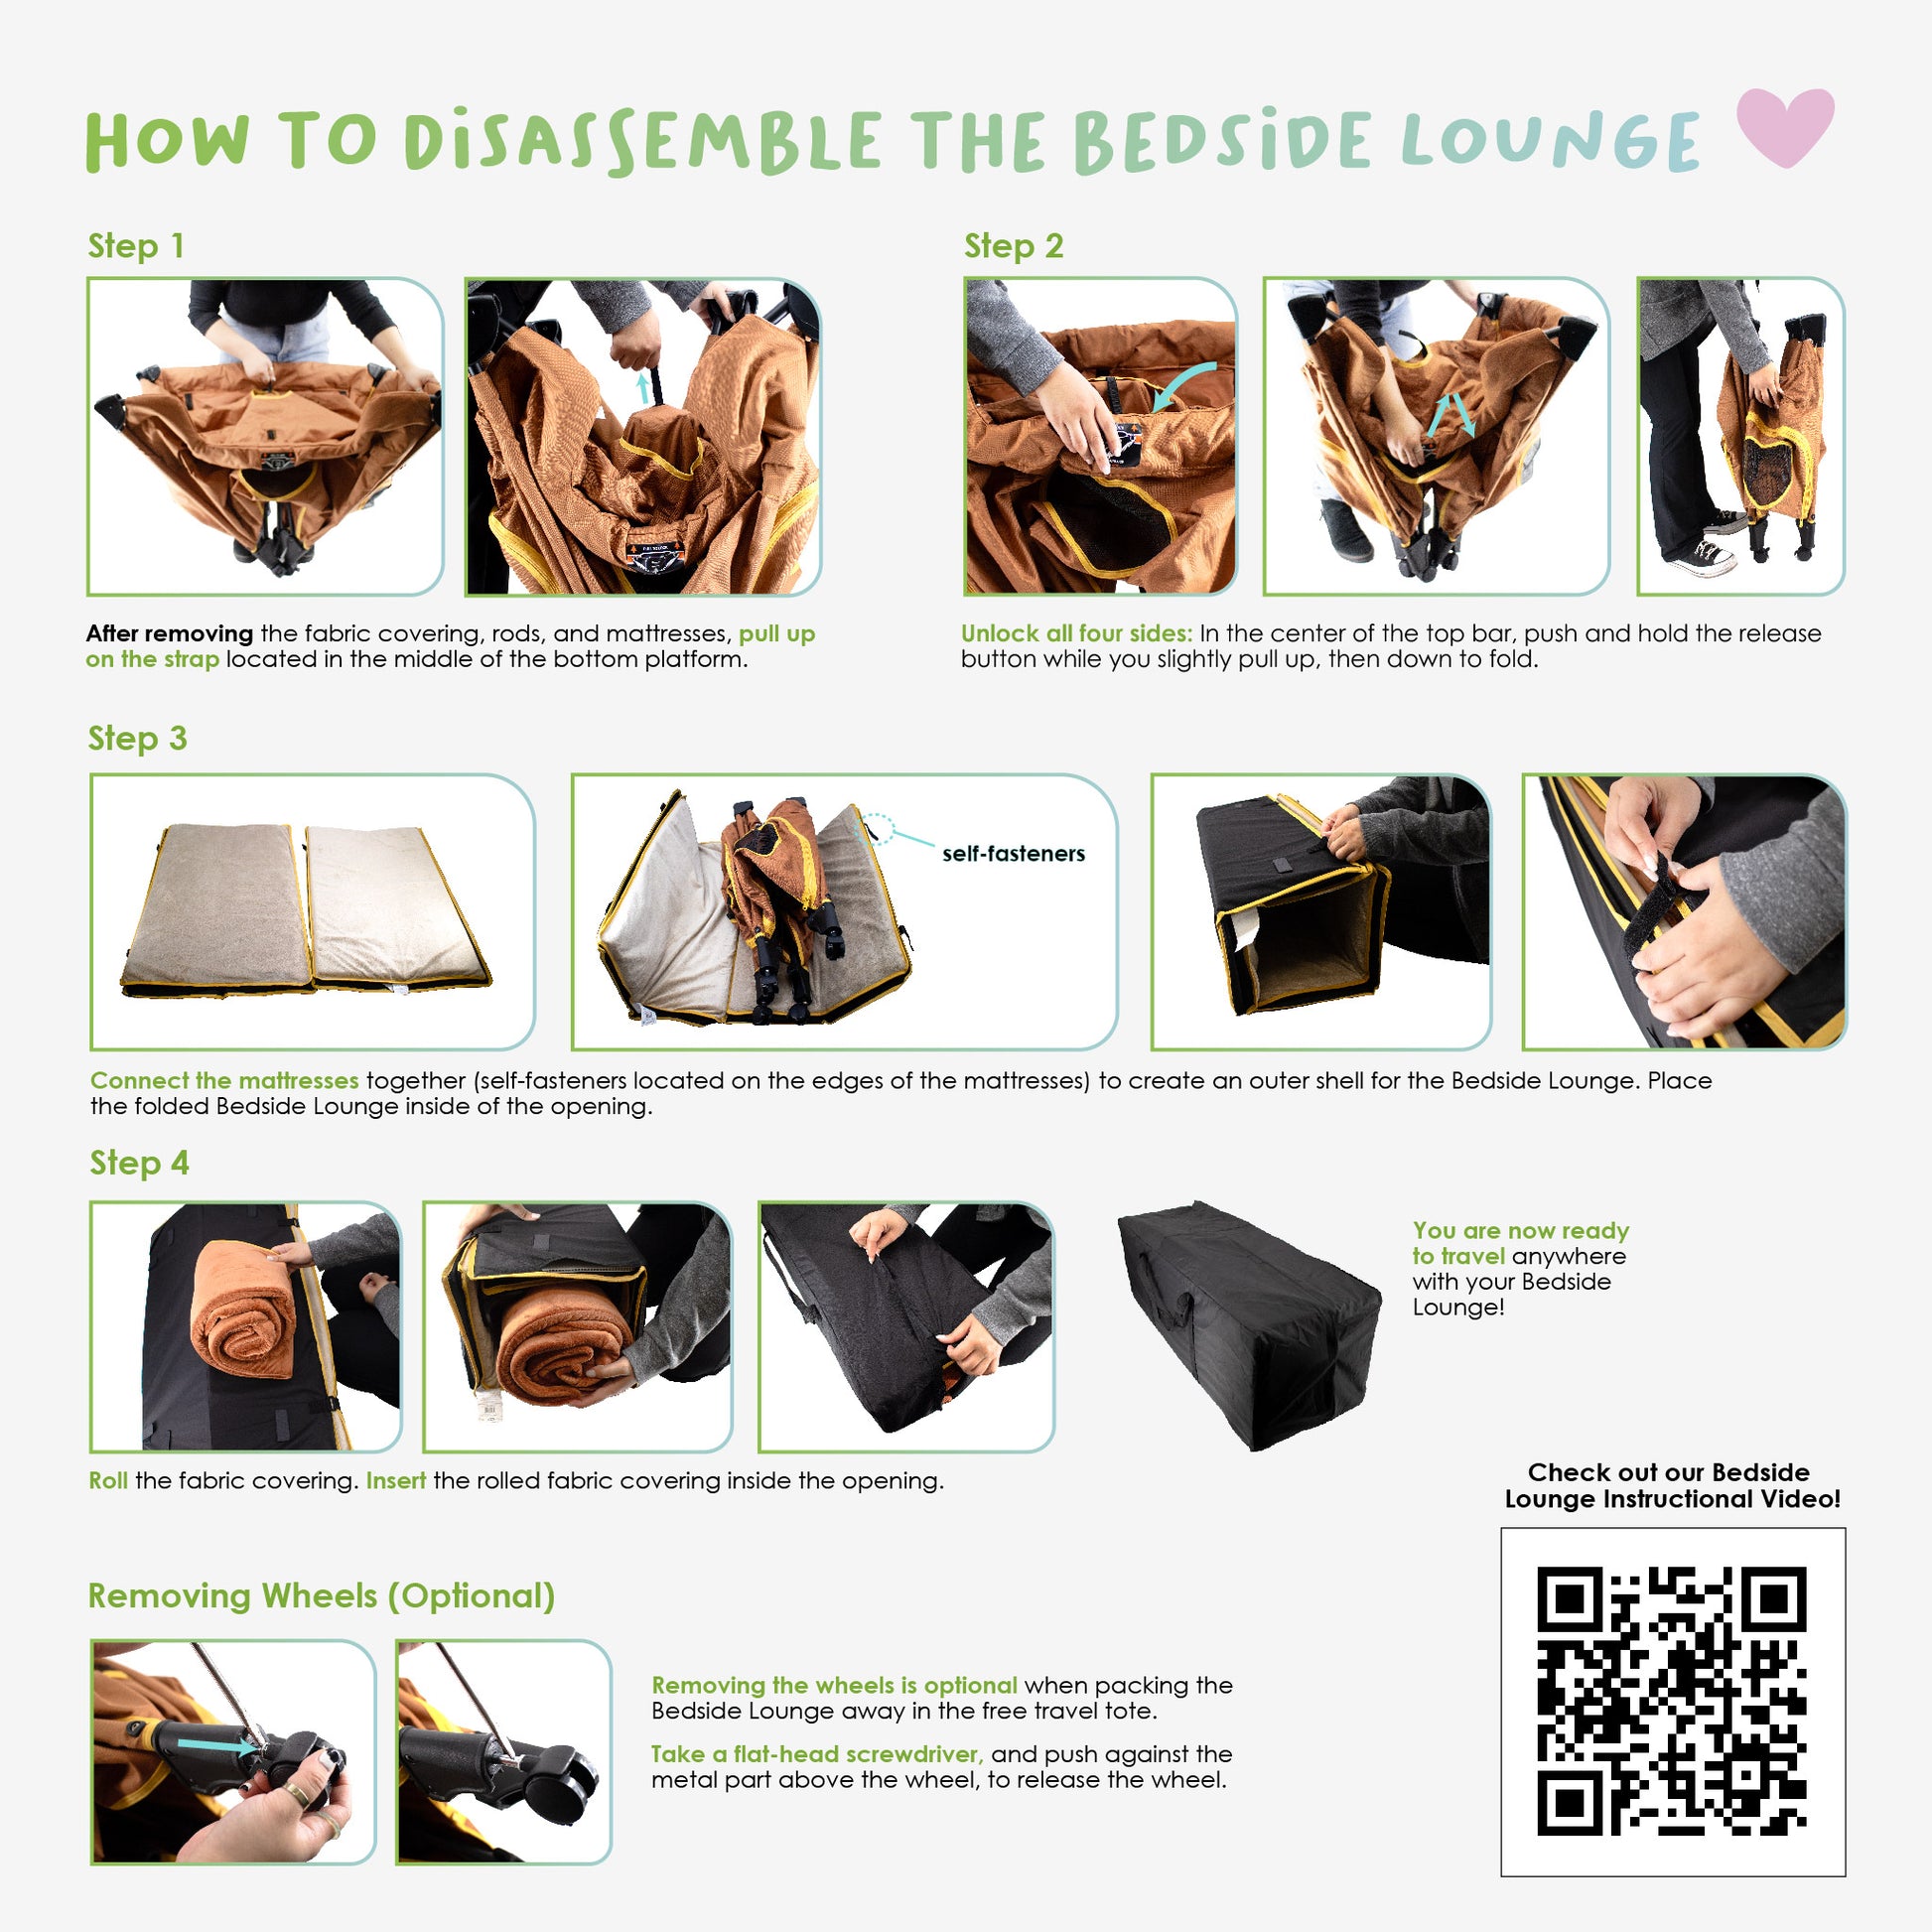 how to disassemble bedside lounge